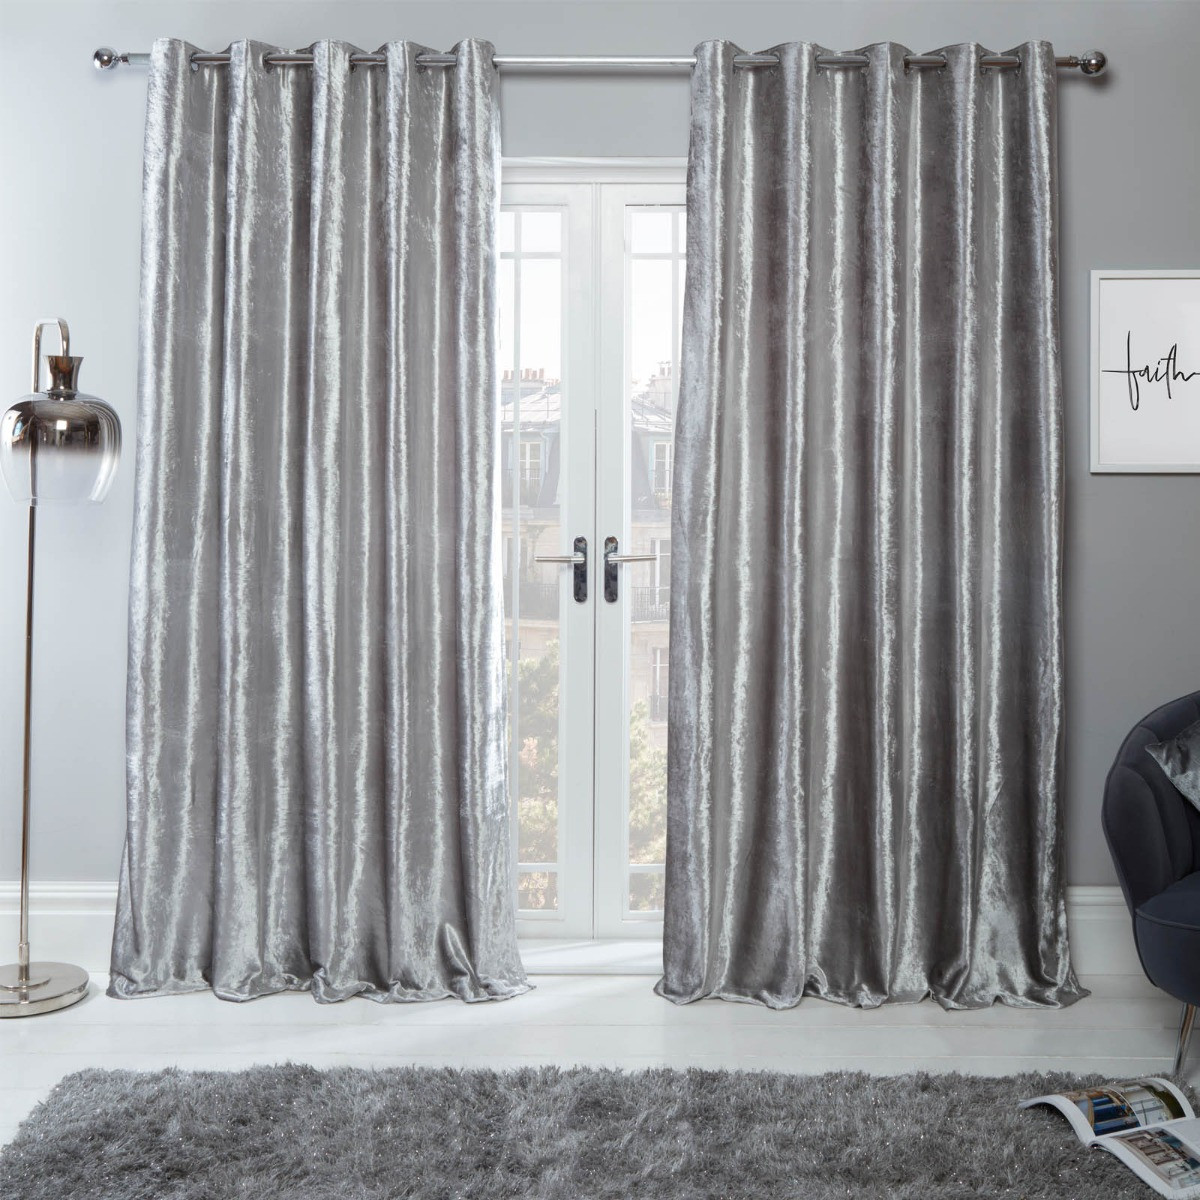 Sienna Home Crushed Velvet Eyelet Curtains - Silver 90" x 90">